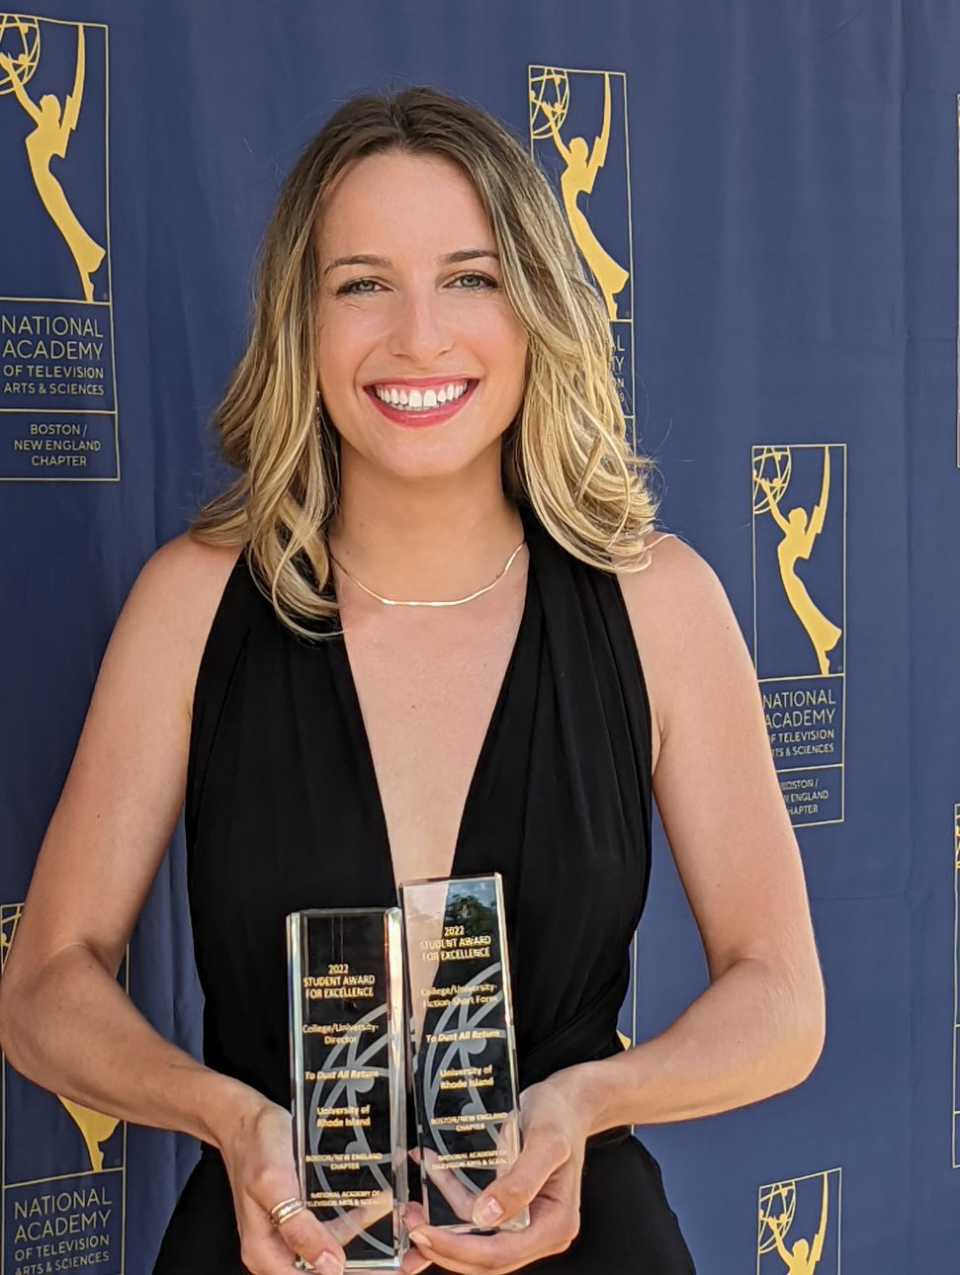 Fairhaven resident Alyssa Botelho's short film "To Dust All Return" recently won two "Student Emmys" for best short-film fiction, and best director for a short film.